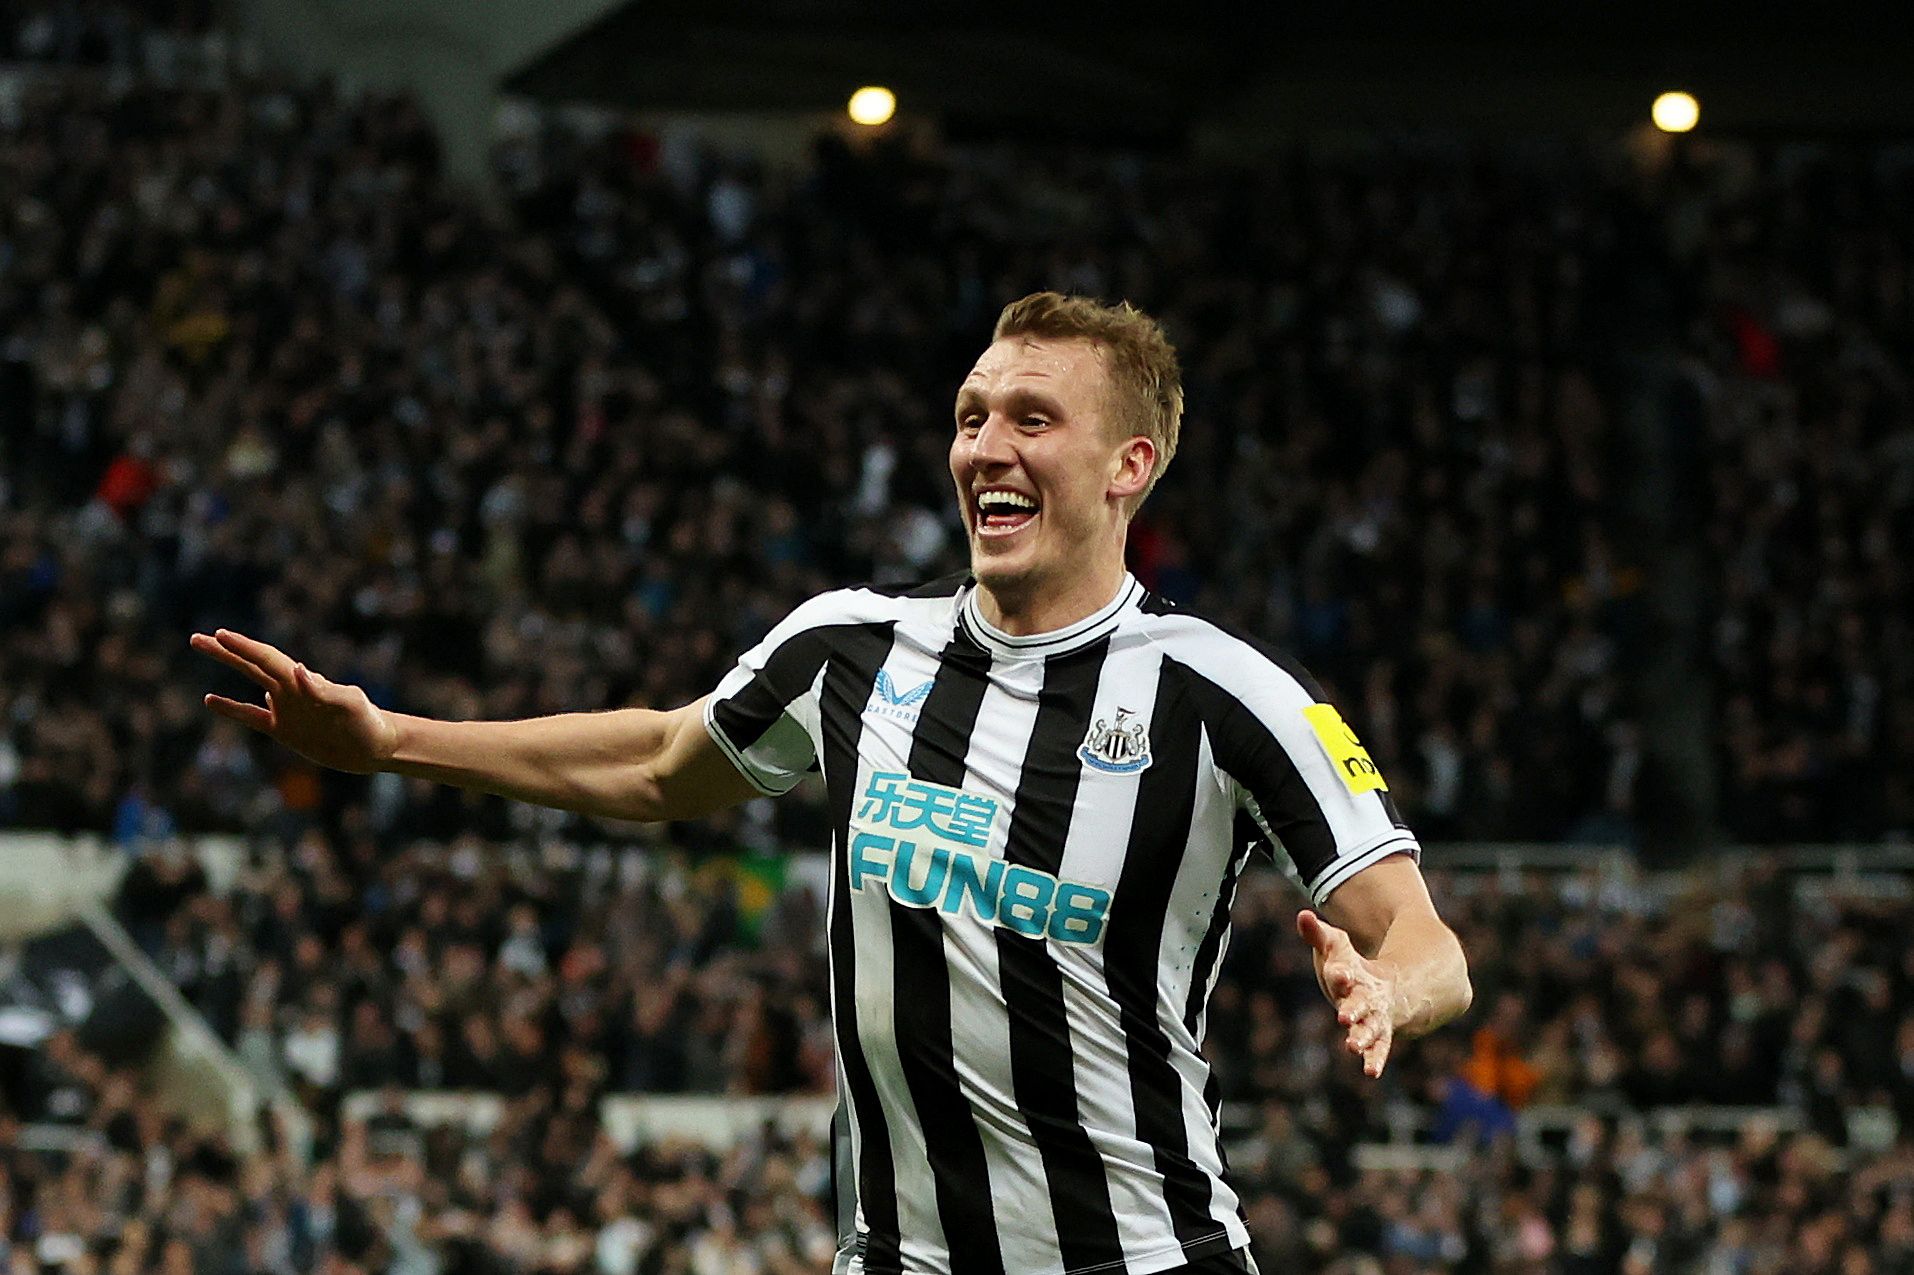 Soccer Football - Carabao Cup - Quarter Final - Newcastle United v Leicester City - St James' Park, Newcastle, Britain - January 10, 2023 Newcastle United's Dan Burn celebrates scoring their first goal Action Images via Reuters/Lee Smith EDITORIAL USE ONLY. No use with unauthorized audio, video, data, fixture lists, club/league logos or 'live' services. Online in-match use limited to 75 images, no video emulation. No use in betting, games or single club /league/player publications.  Please conta